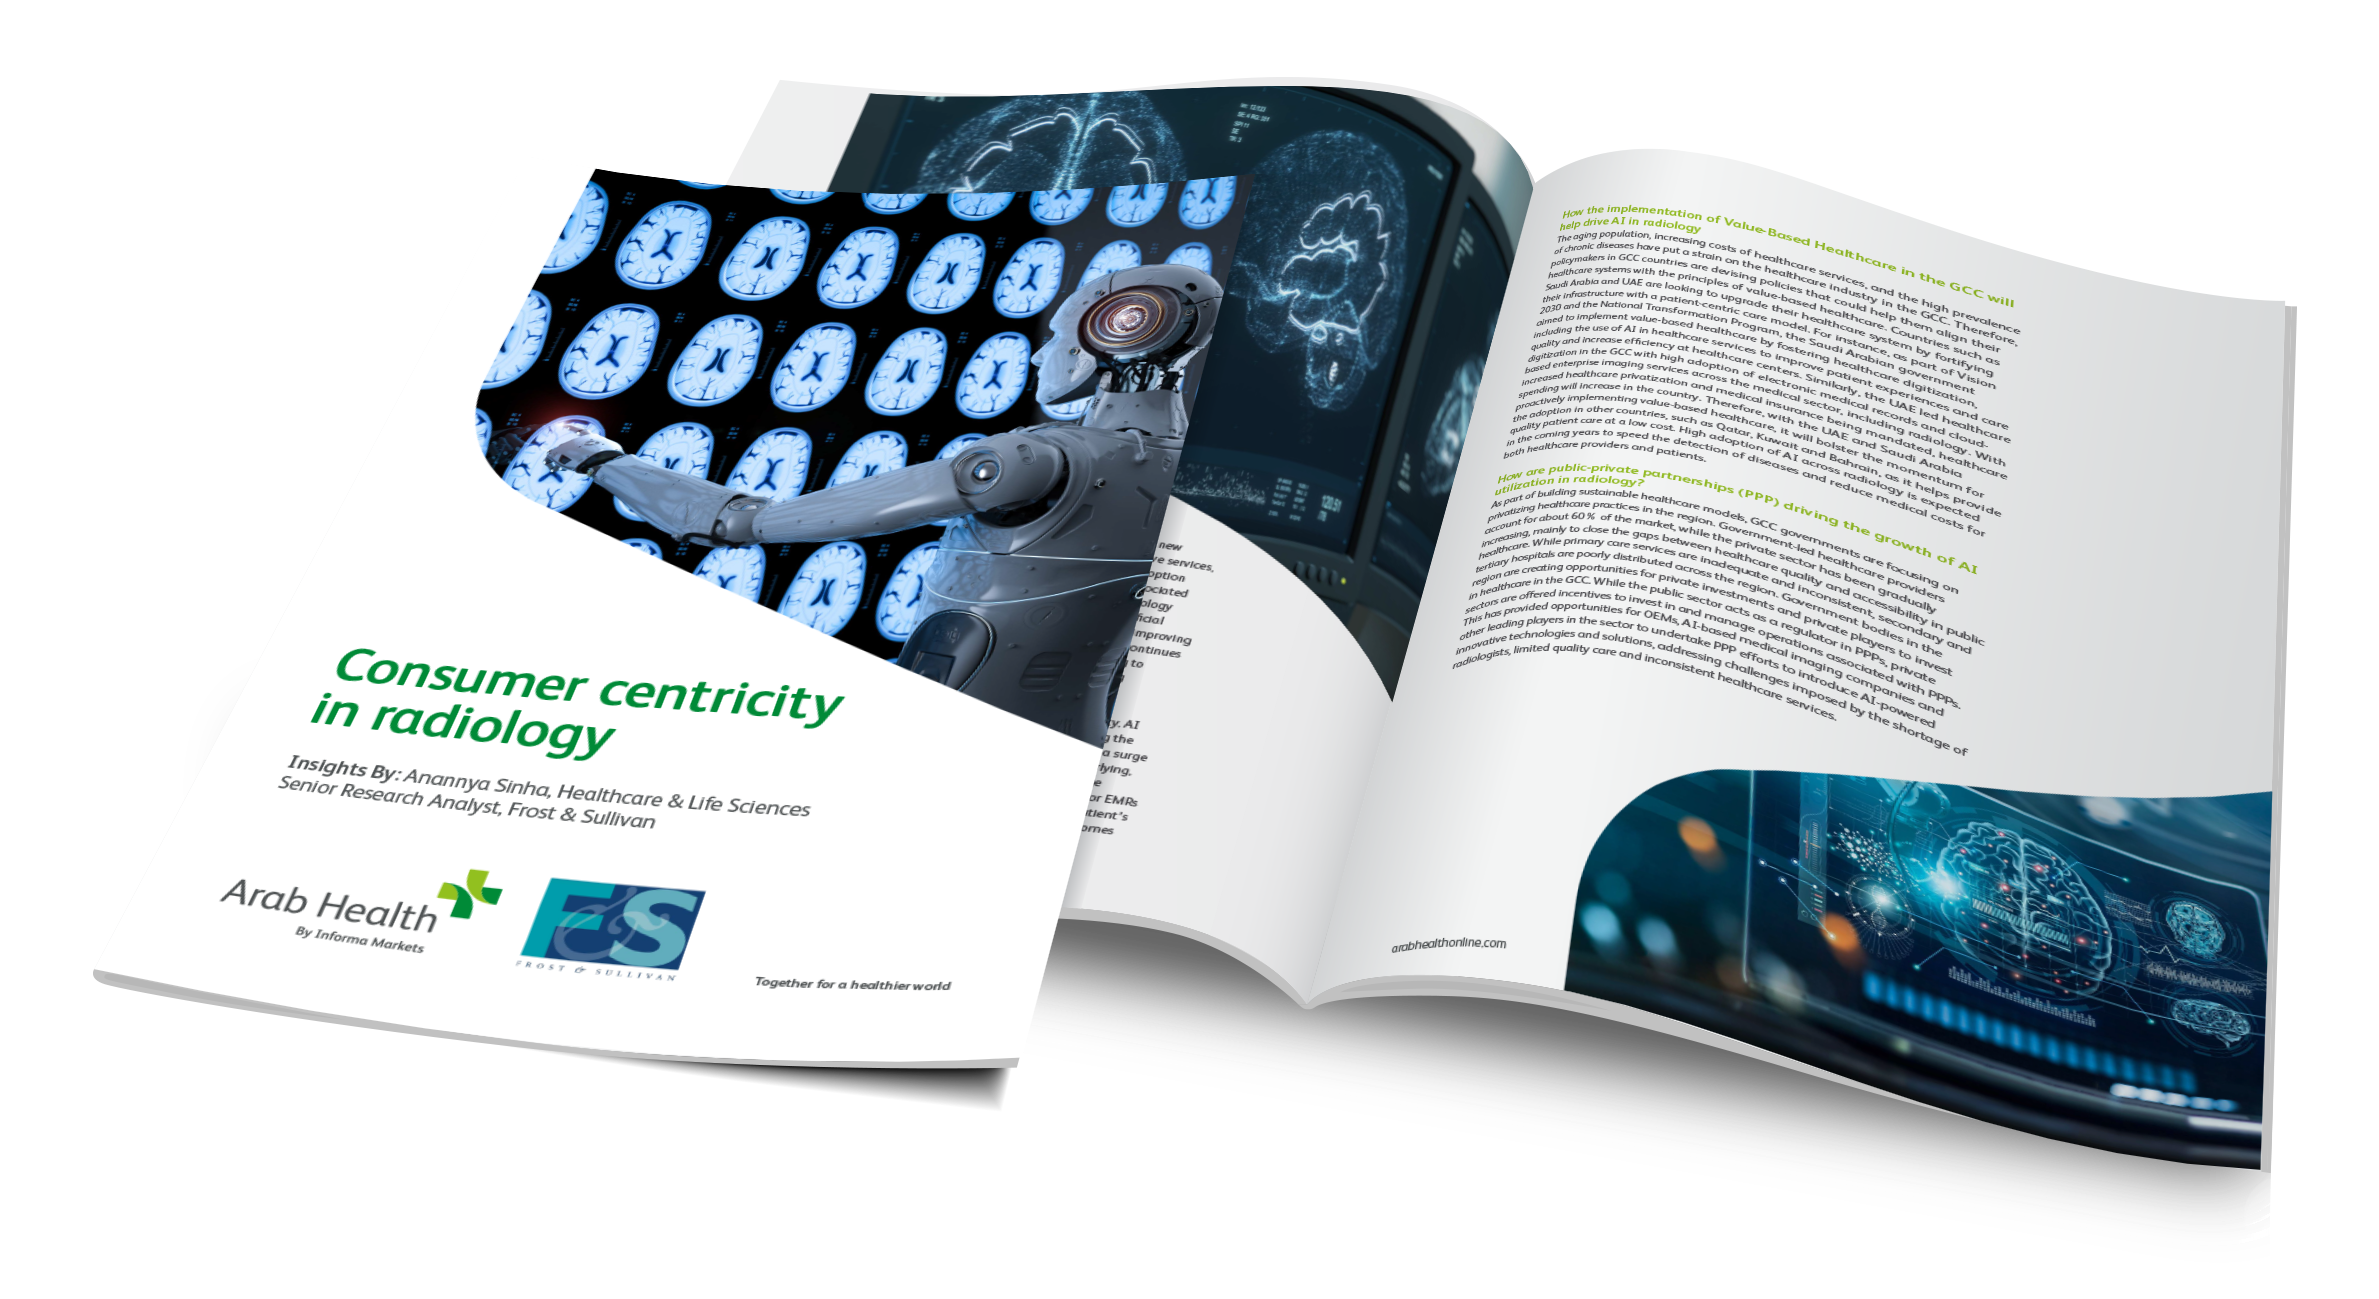 Consumer centricity in radiology - Healthcare industry news - Arab Health